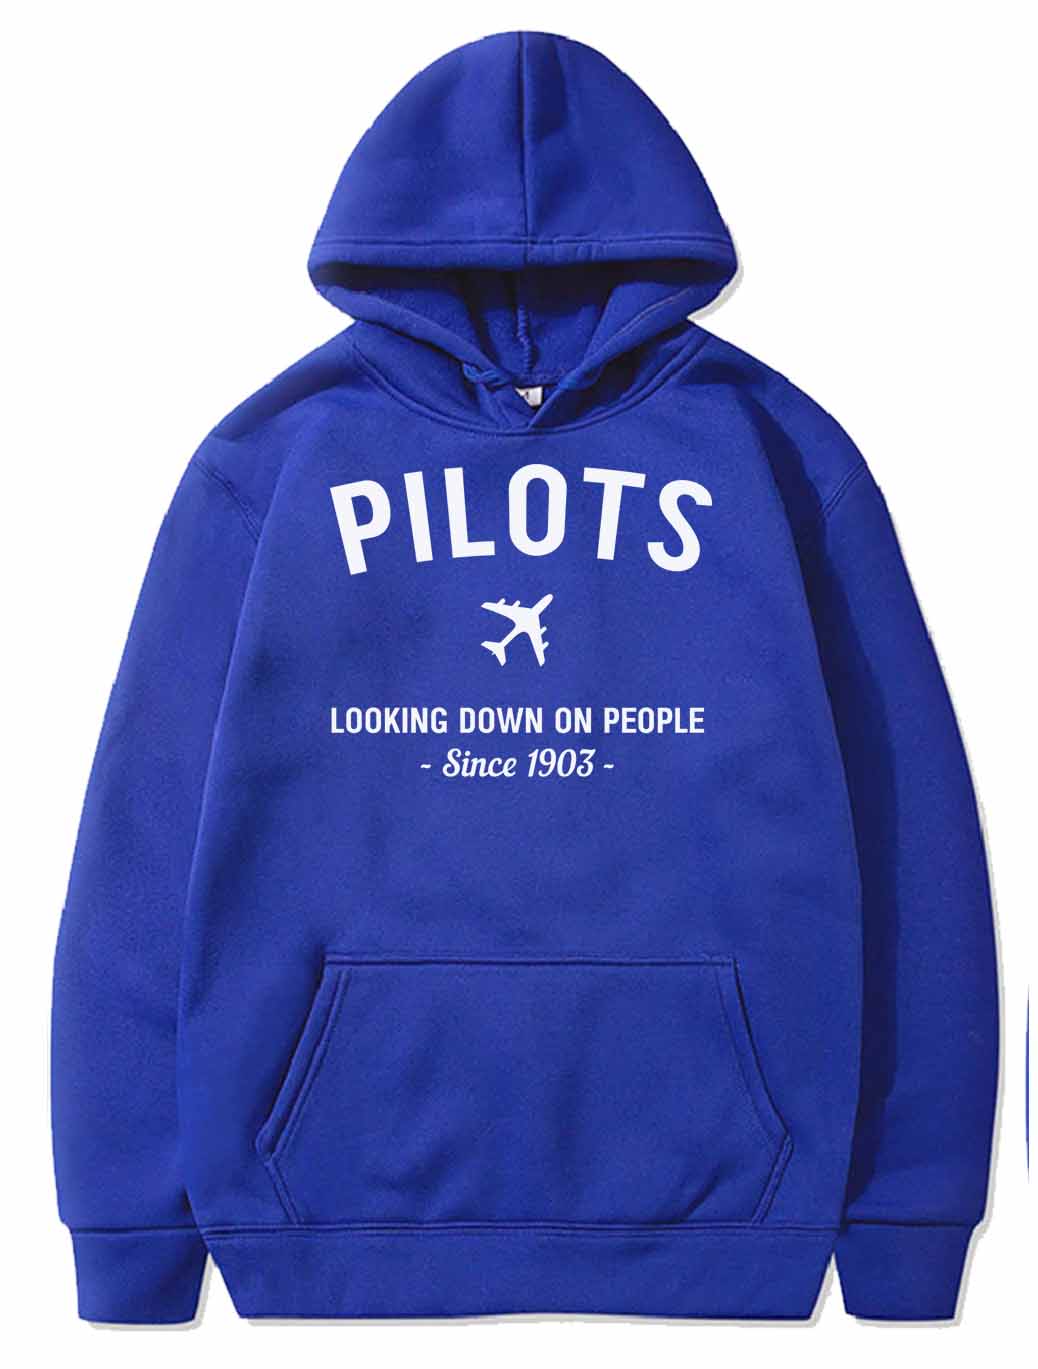 Pilots. Looking down on people since 1903 PULLOVER THE AV8R